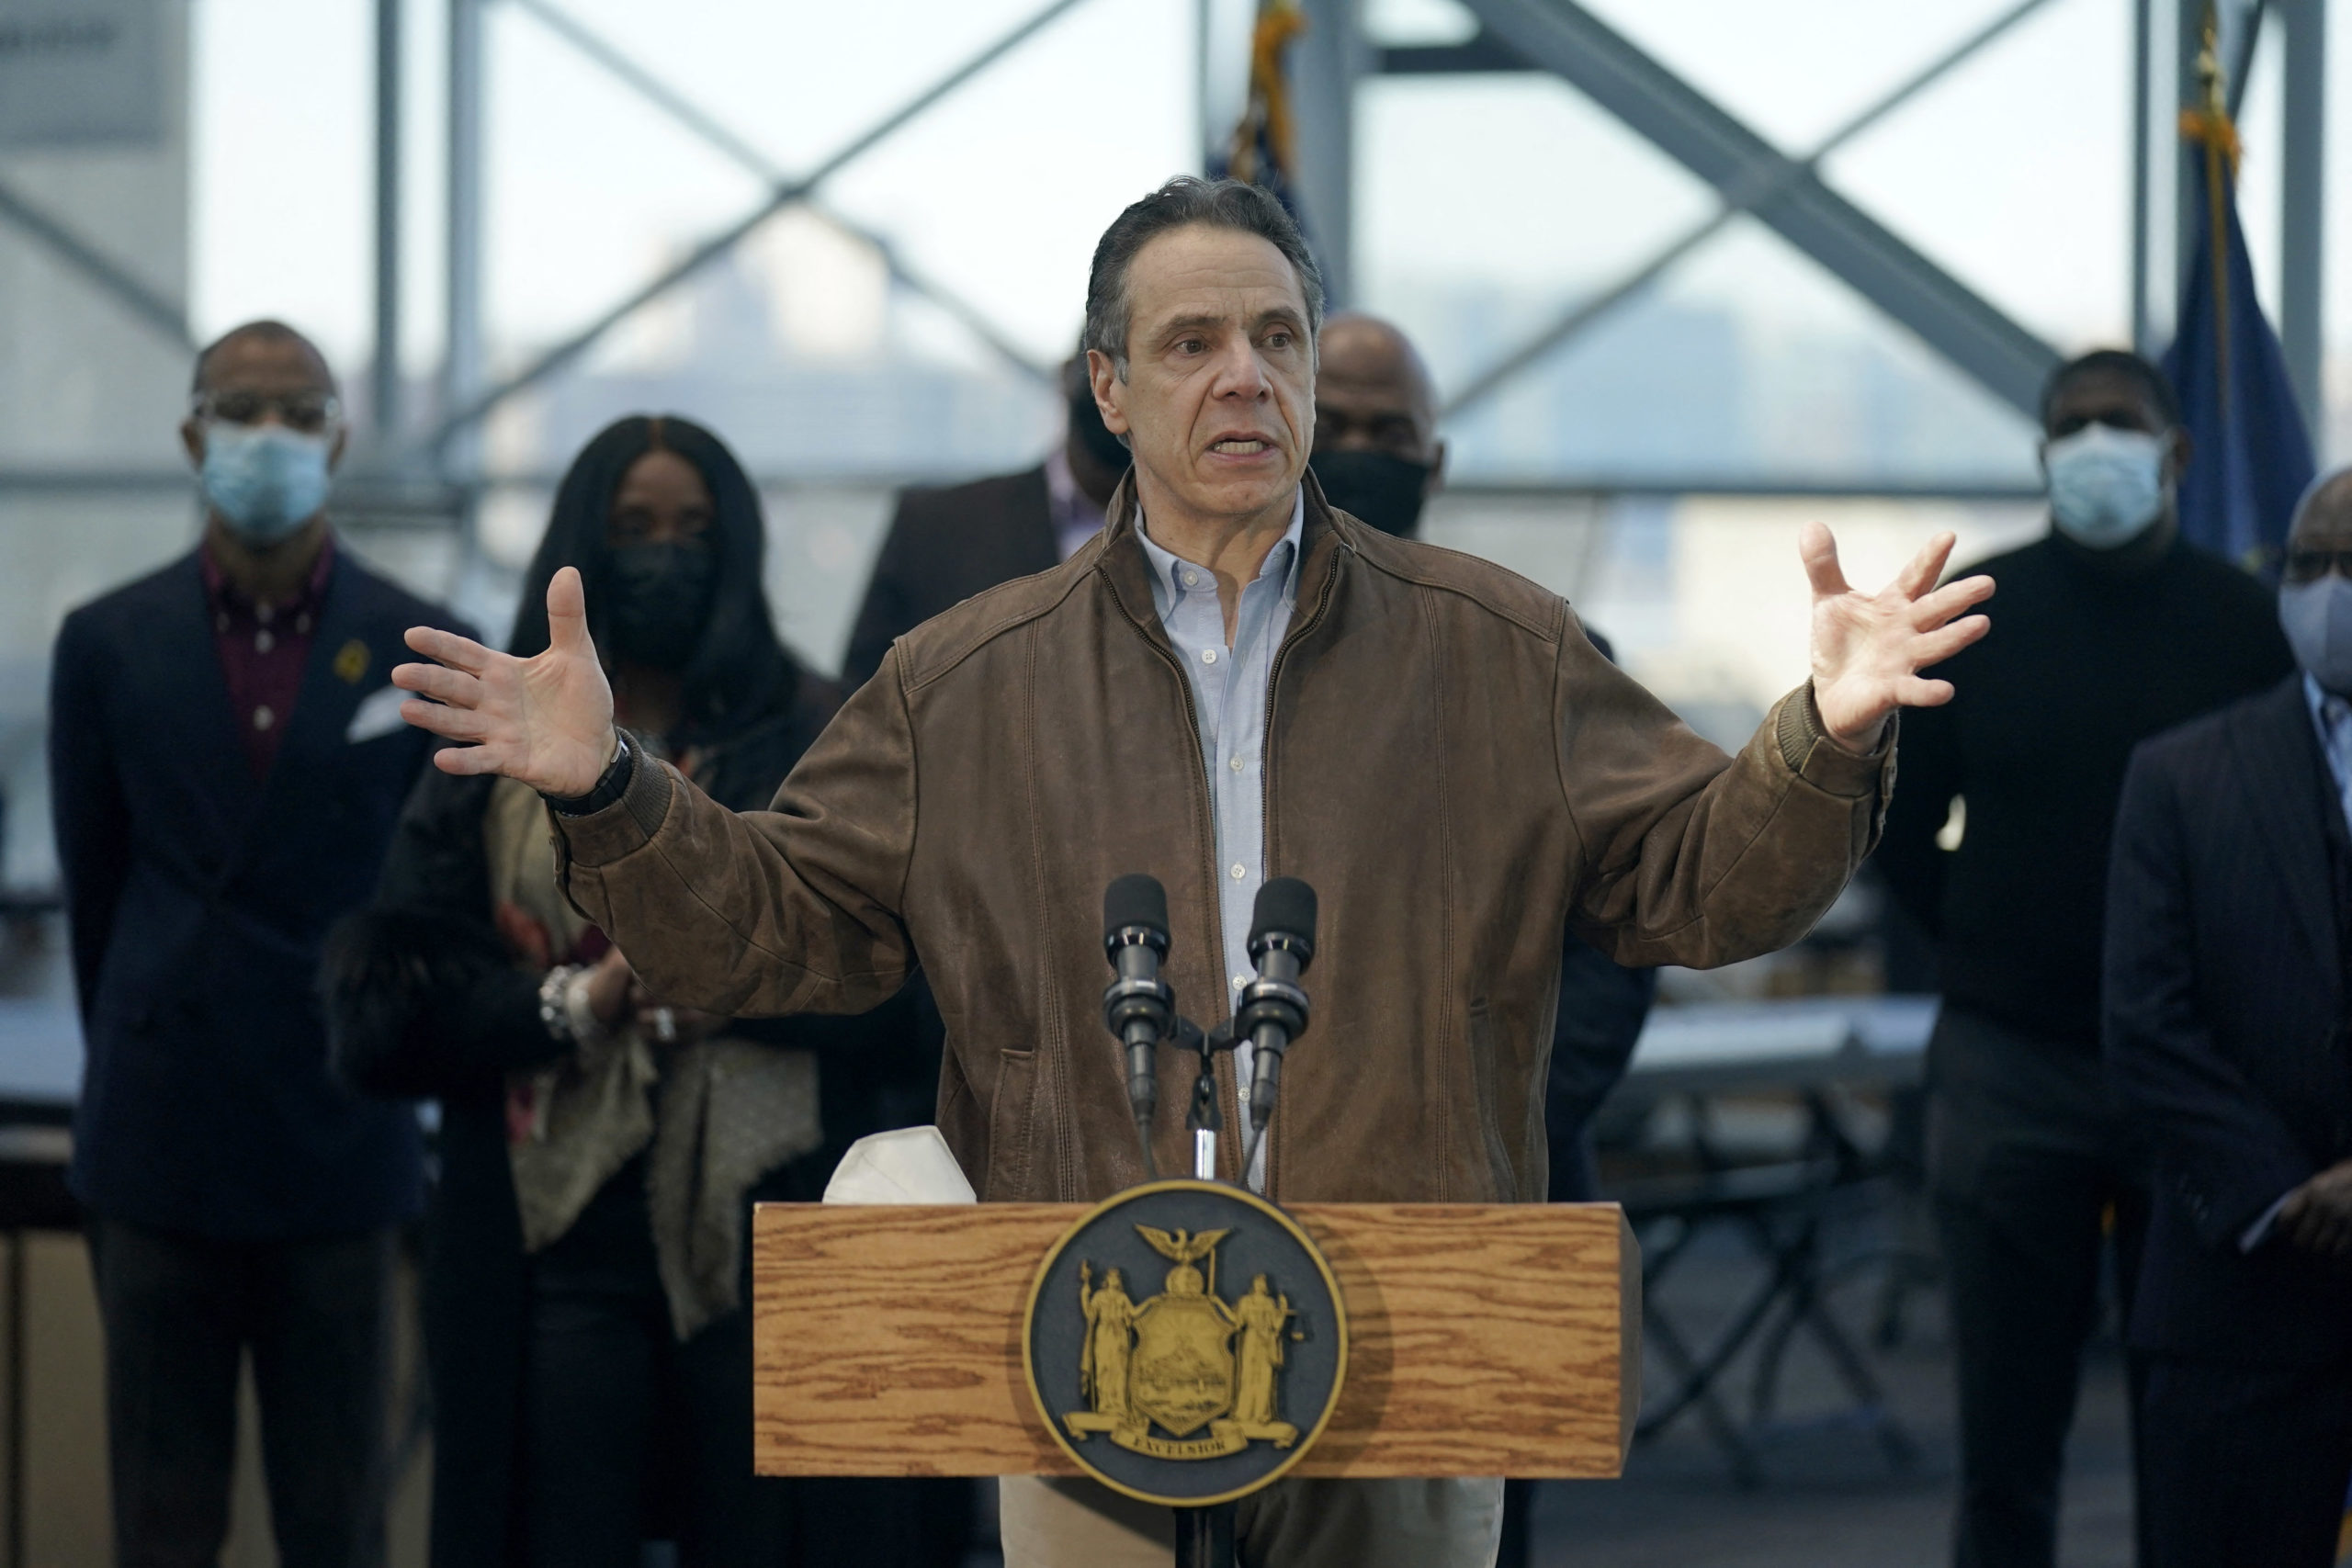 New York Governor Andrew Cuomo speaks at a vaccination site on March 8, 2021, in New York. (SETH WENIG/POOL/AFP via Getty Images)